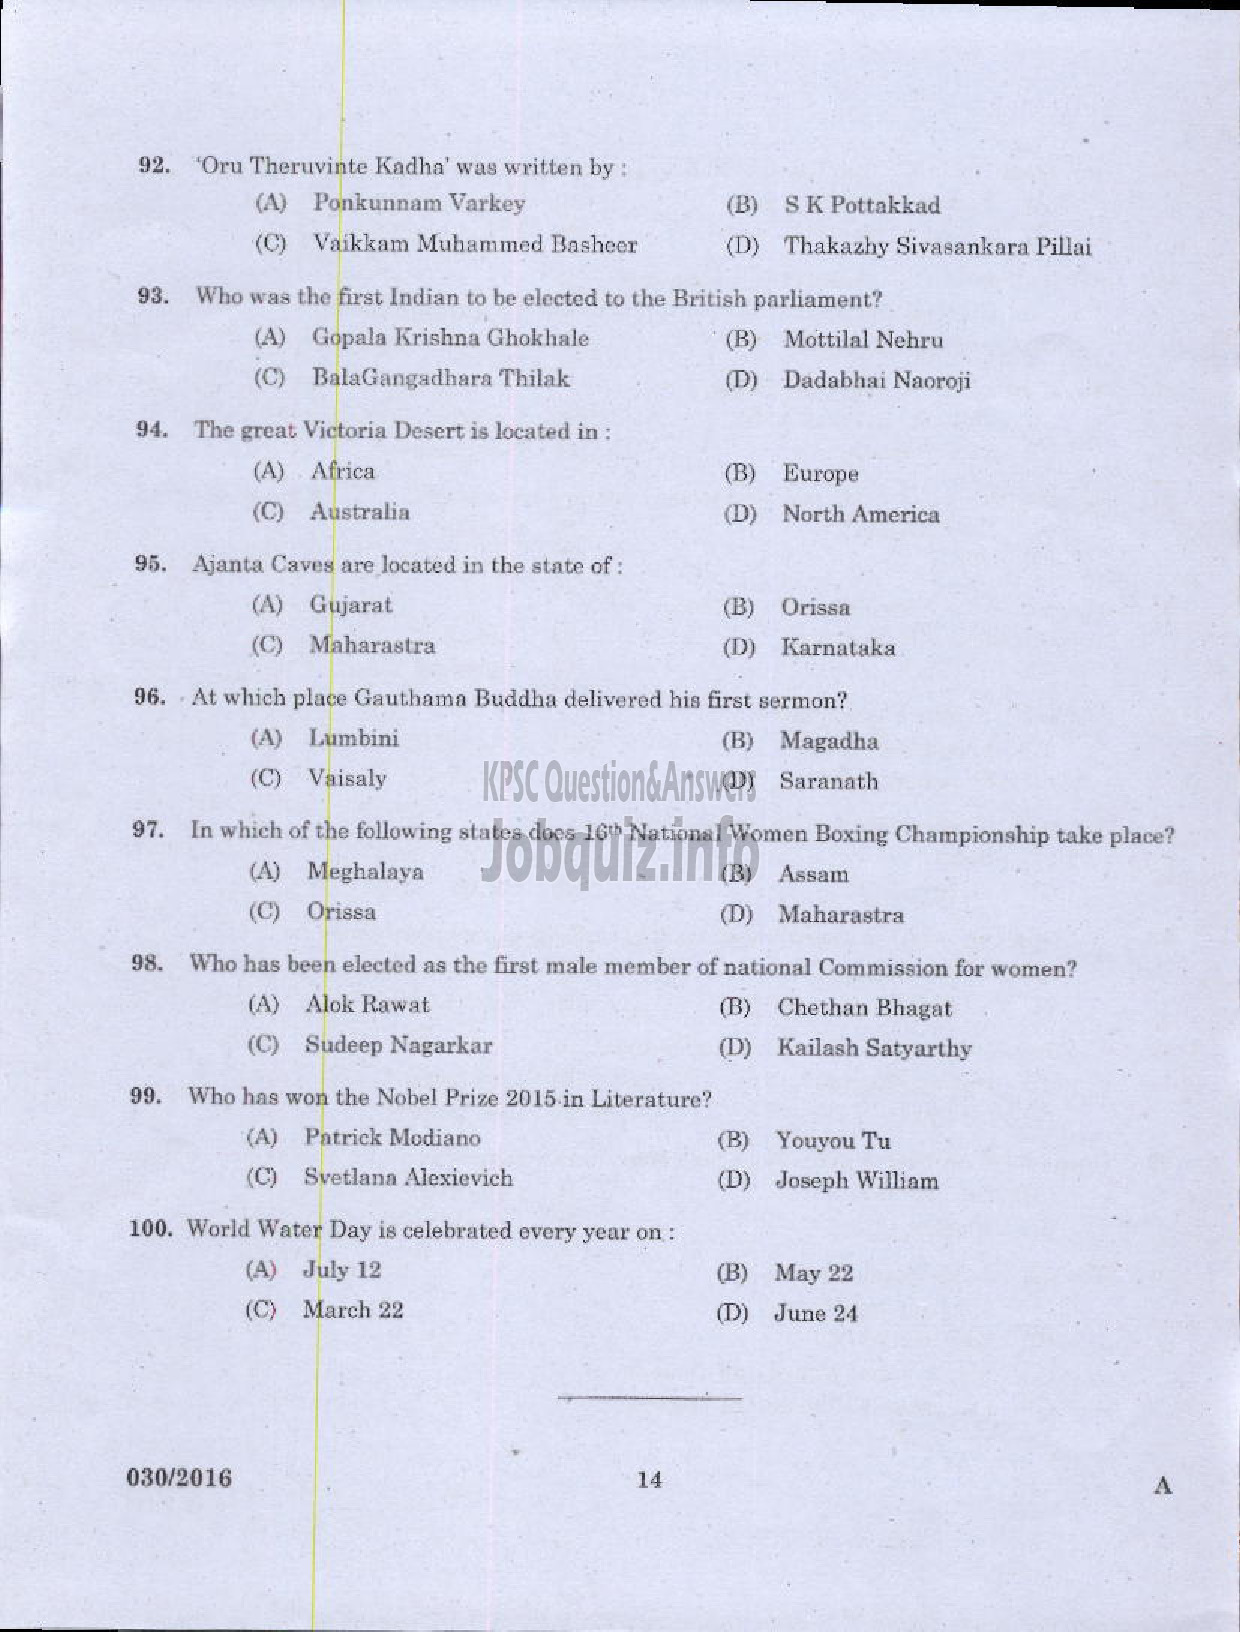 Kerala PSC Question Paper - ASSISTANT ENGINEER ELECTRICAL HARBOUR ENGINEERING-12